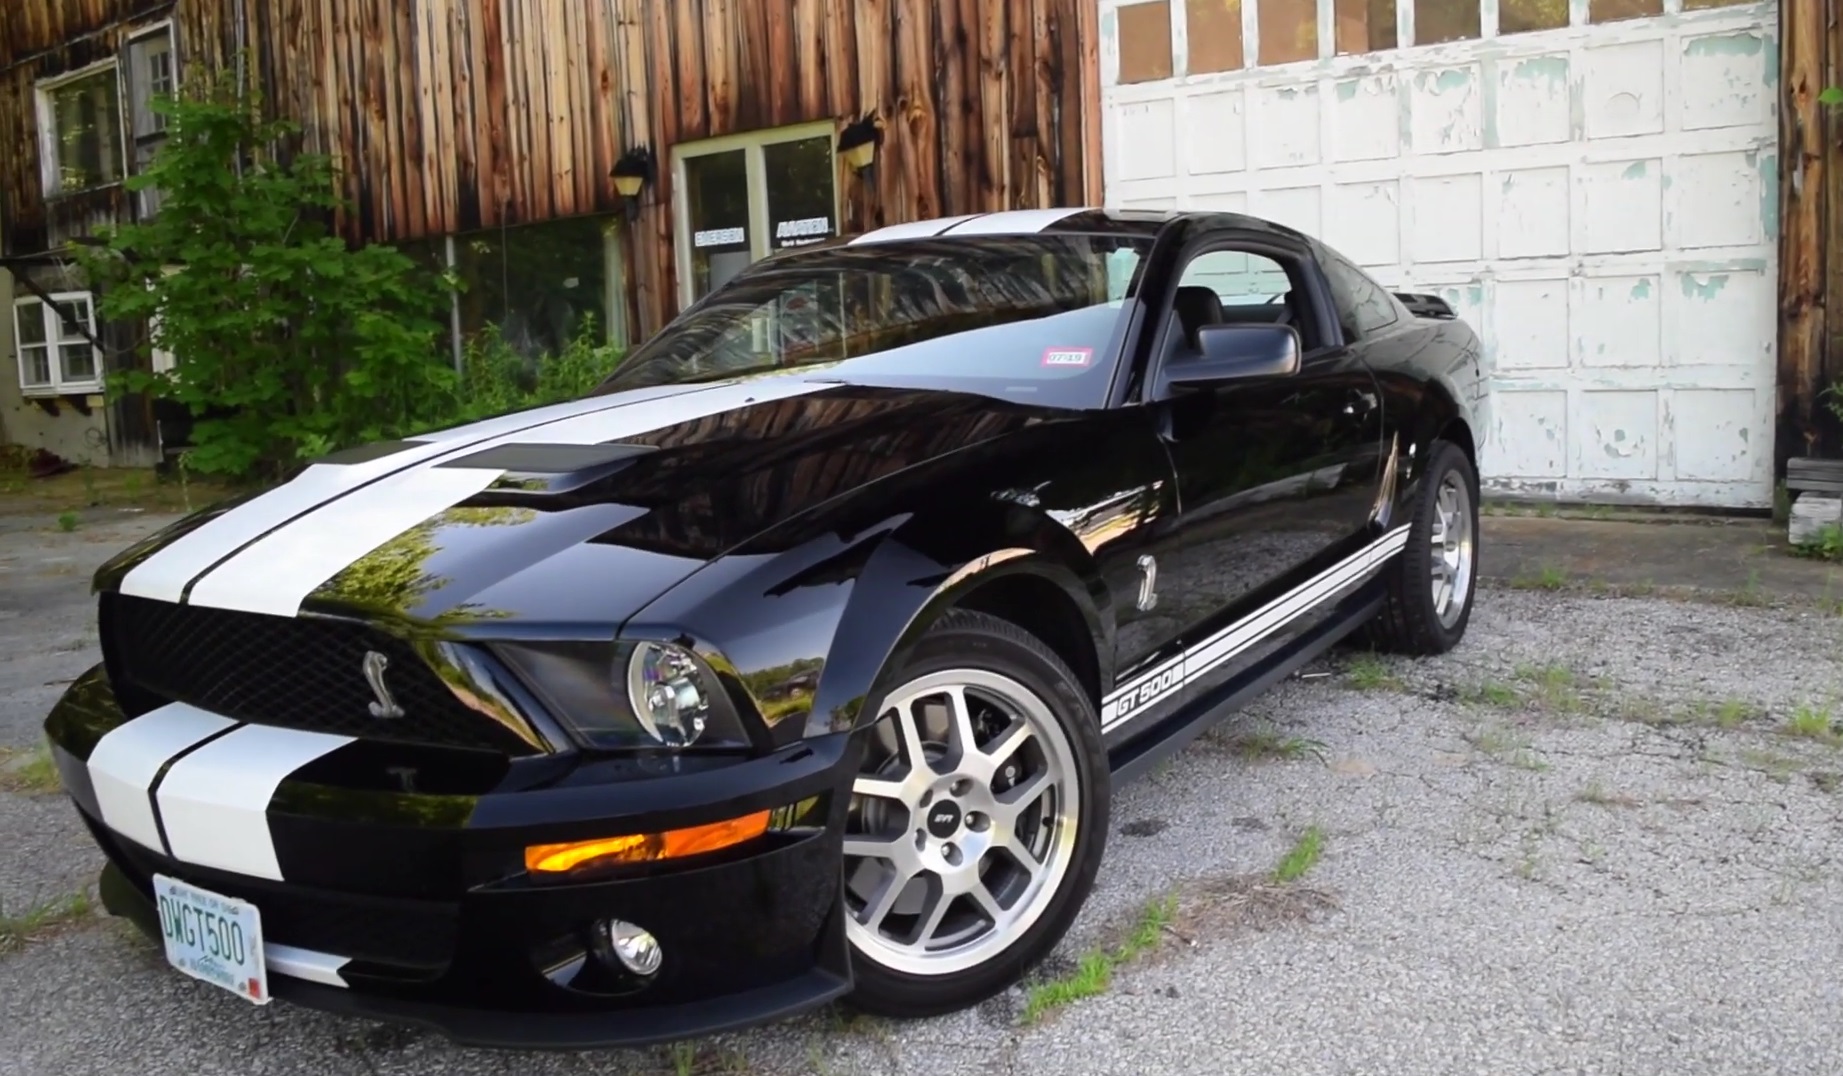 Video: 2008 Ford Mustang Shelby GT500 In-Depth Review